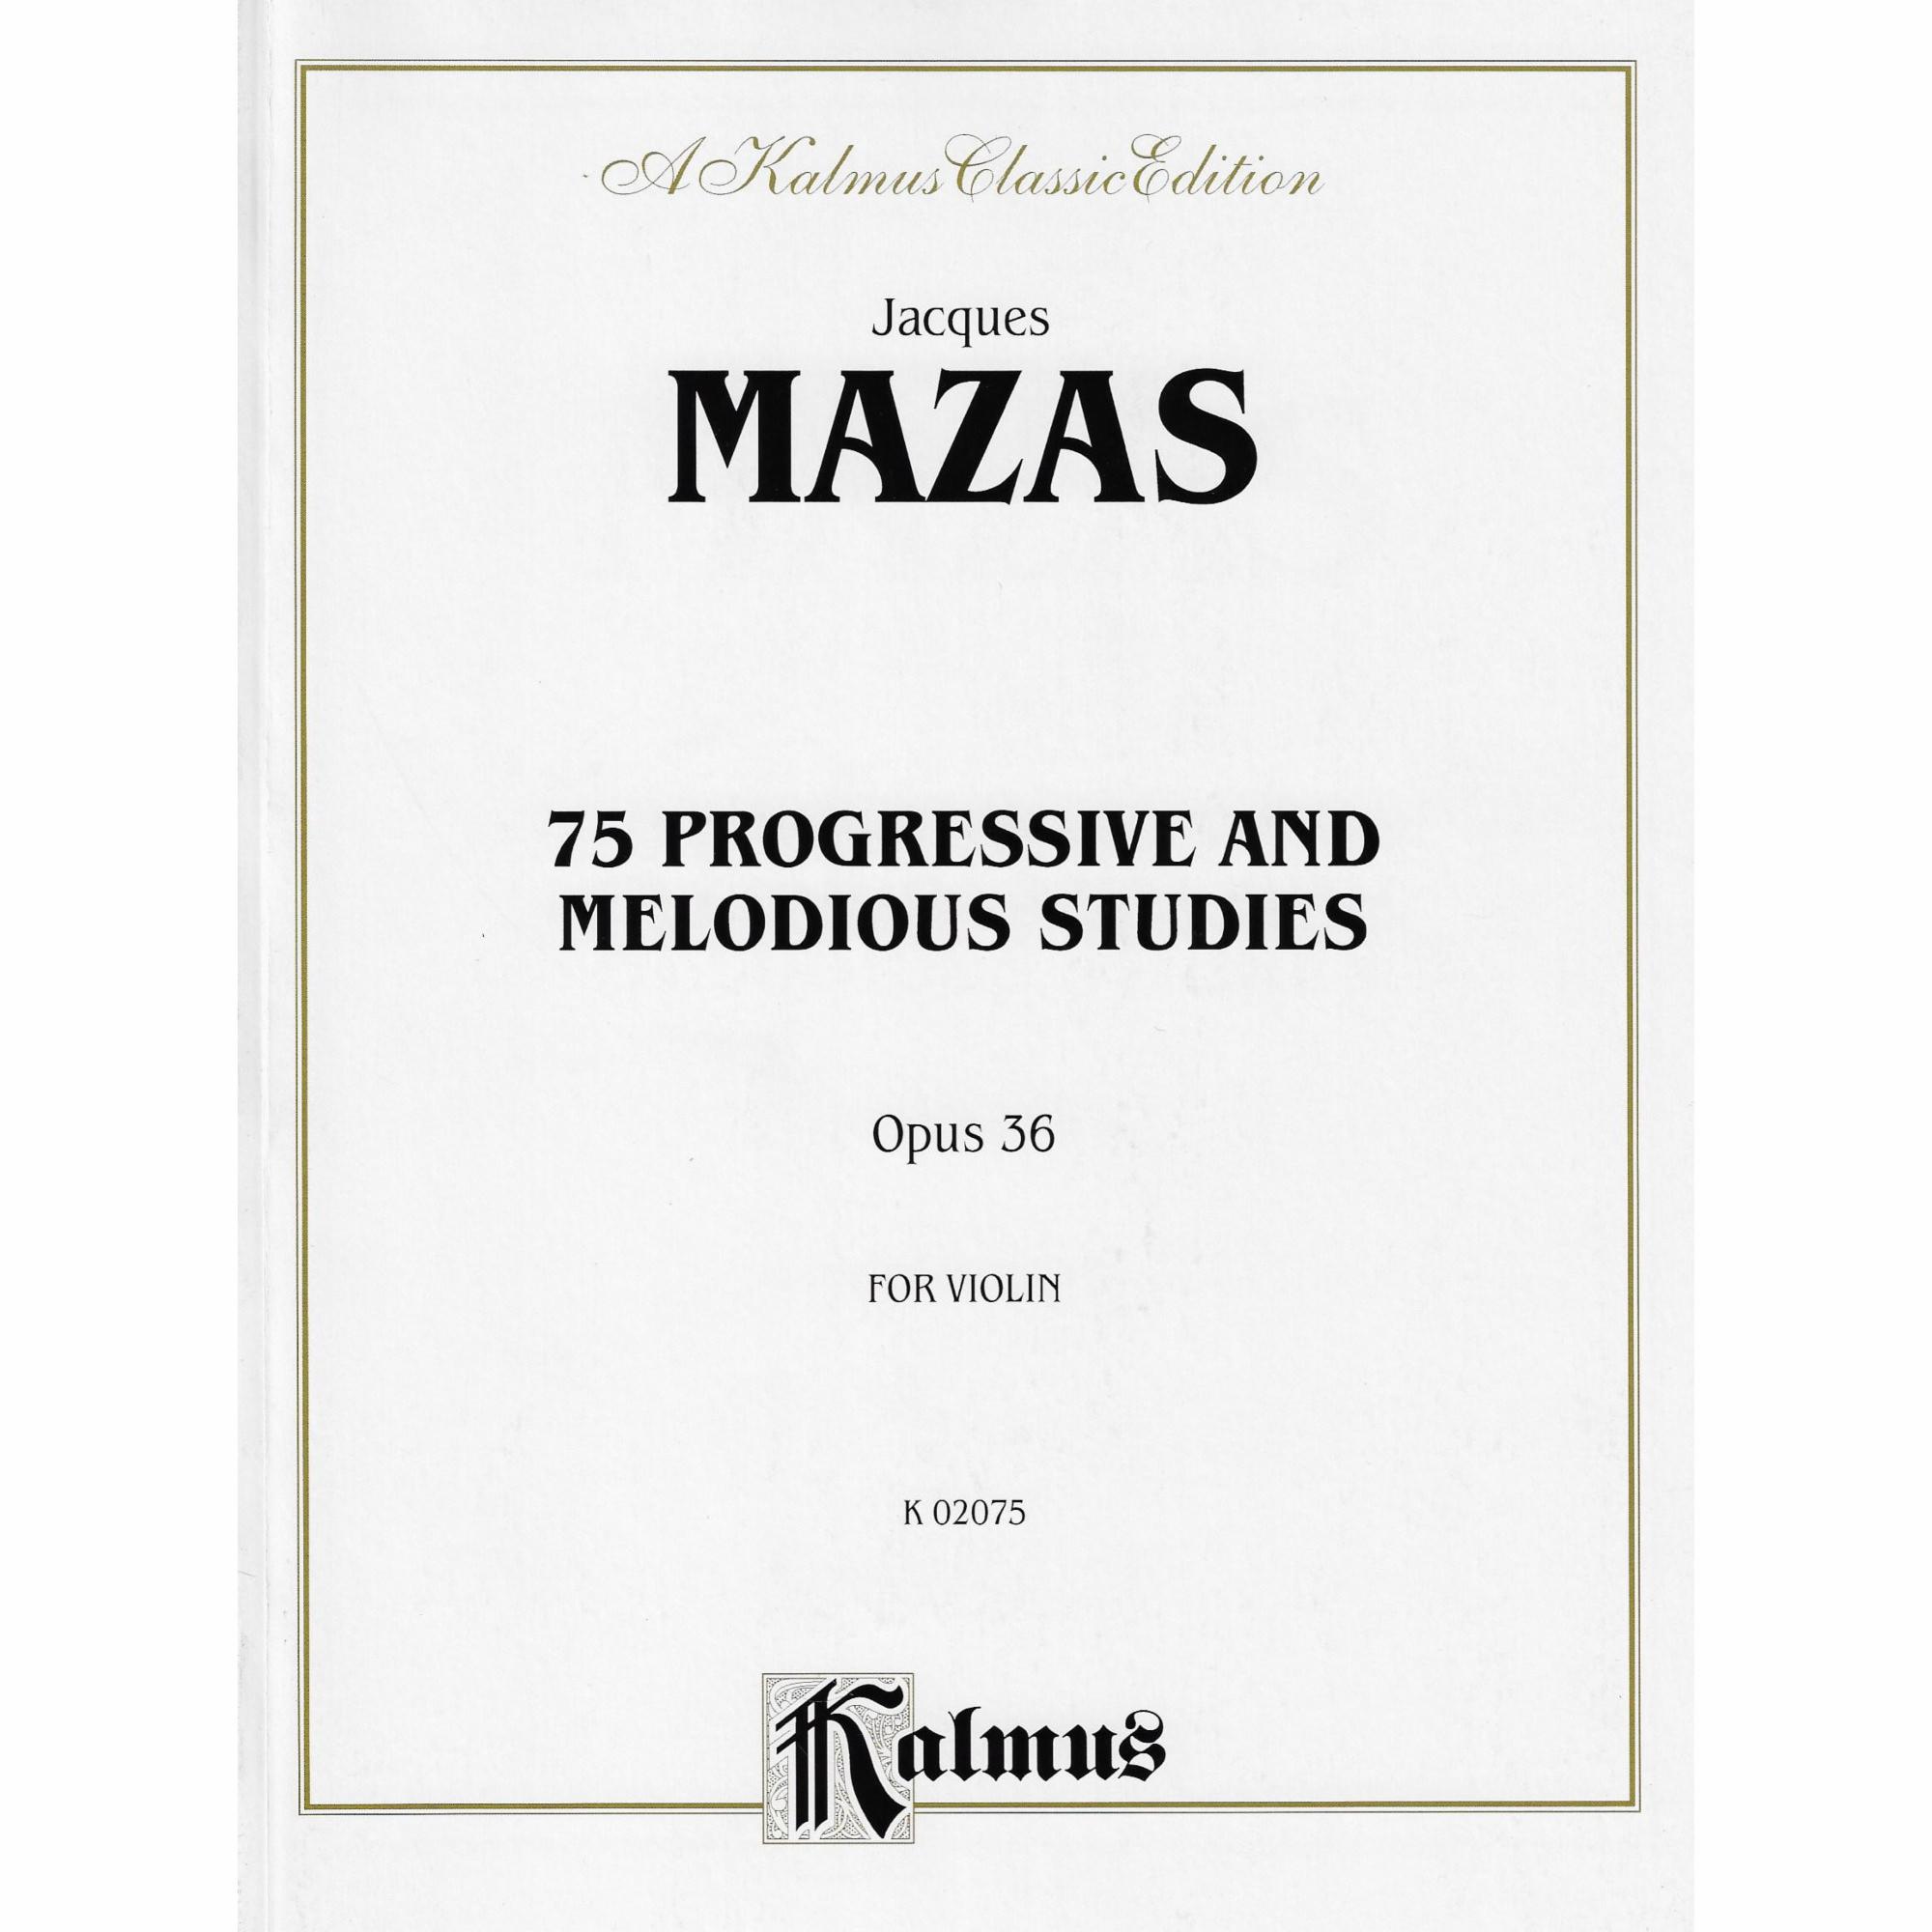 Mazas -- 75 Progressive and Melodious Studies, Op. 36, Books 1-3 for Violin